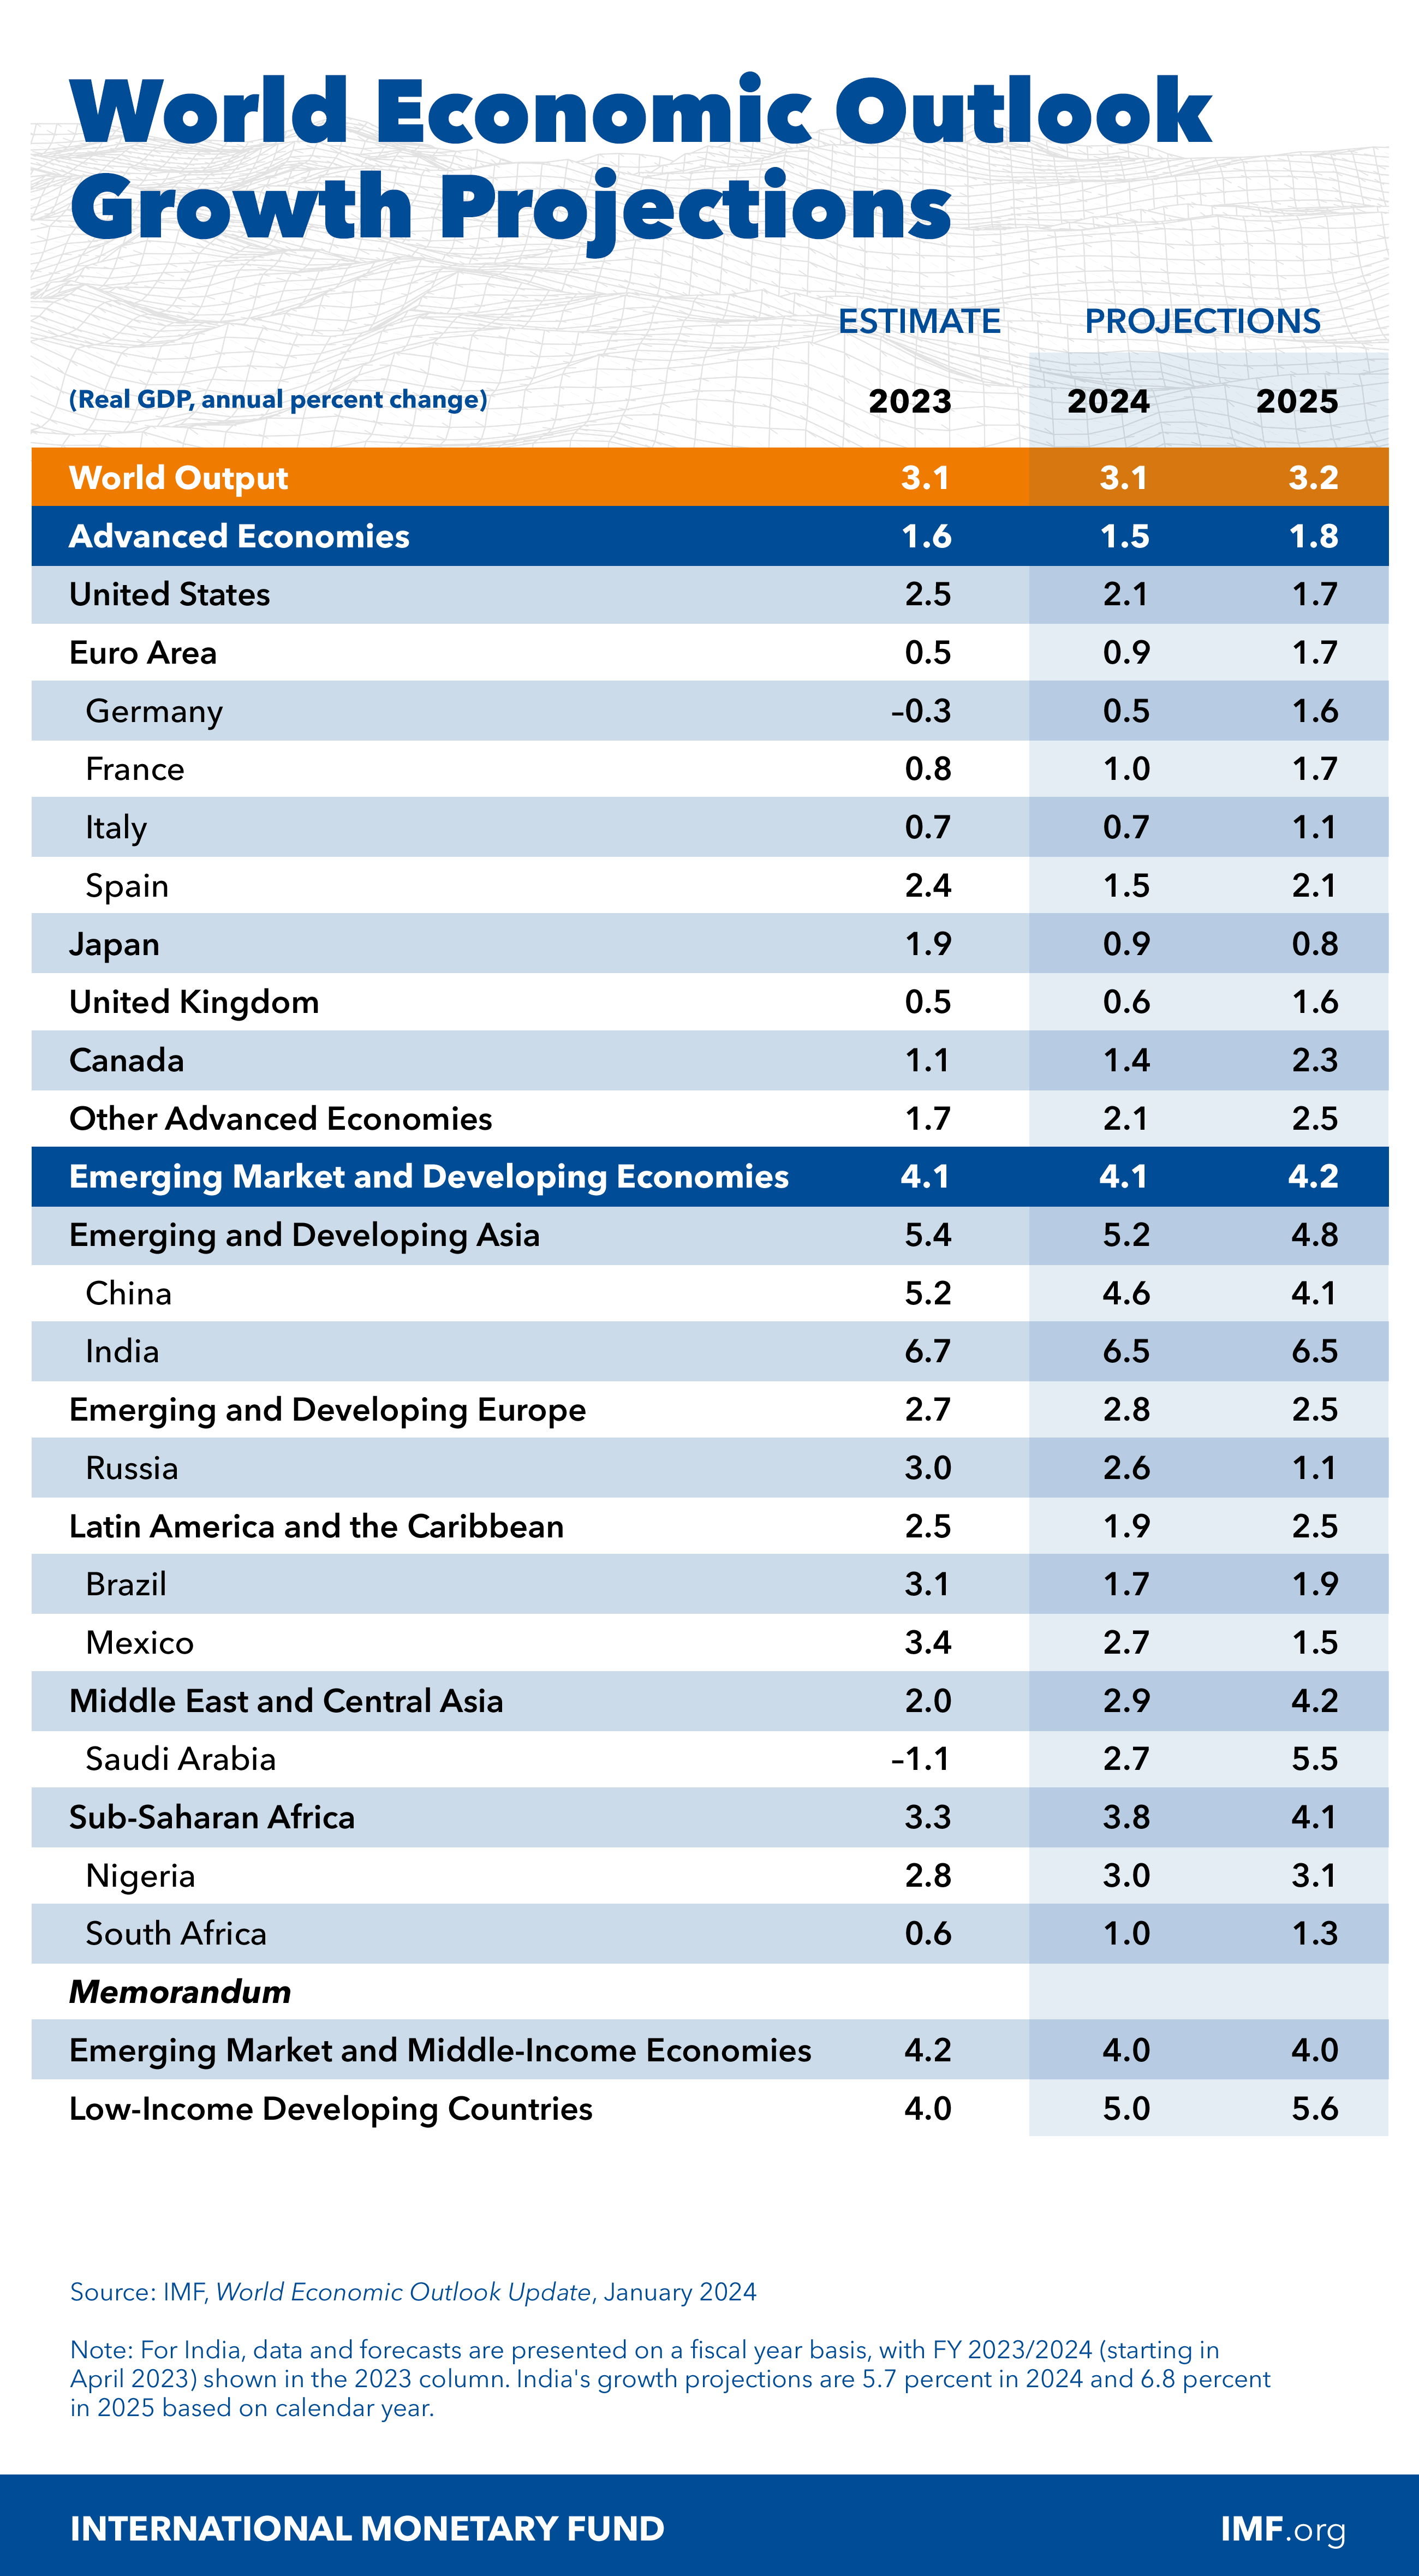 IMF WEO: Global Economy Approaches Soft Landing, but Risks Remain